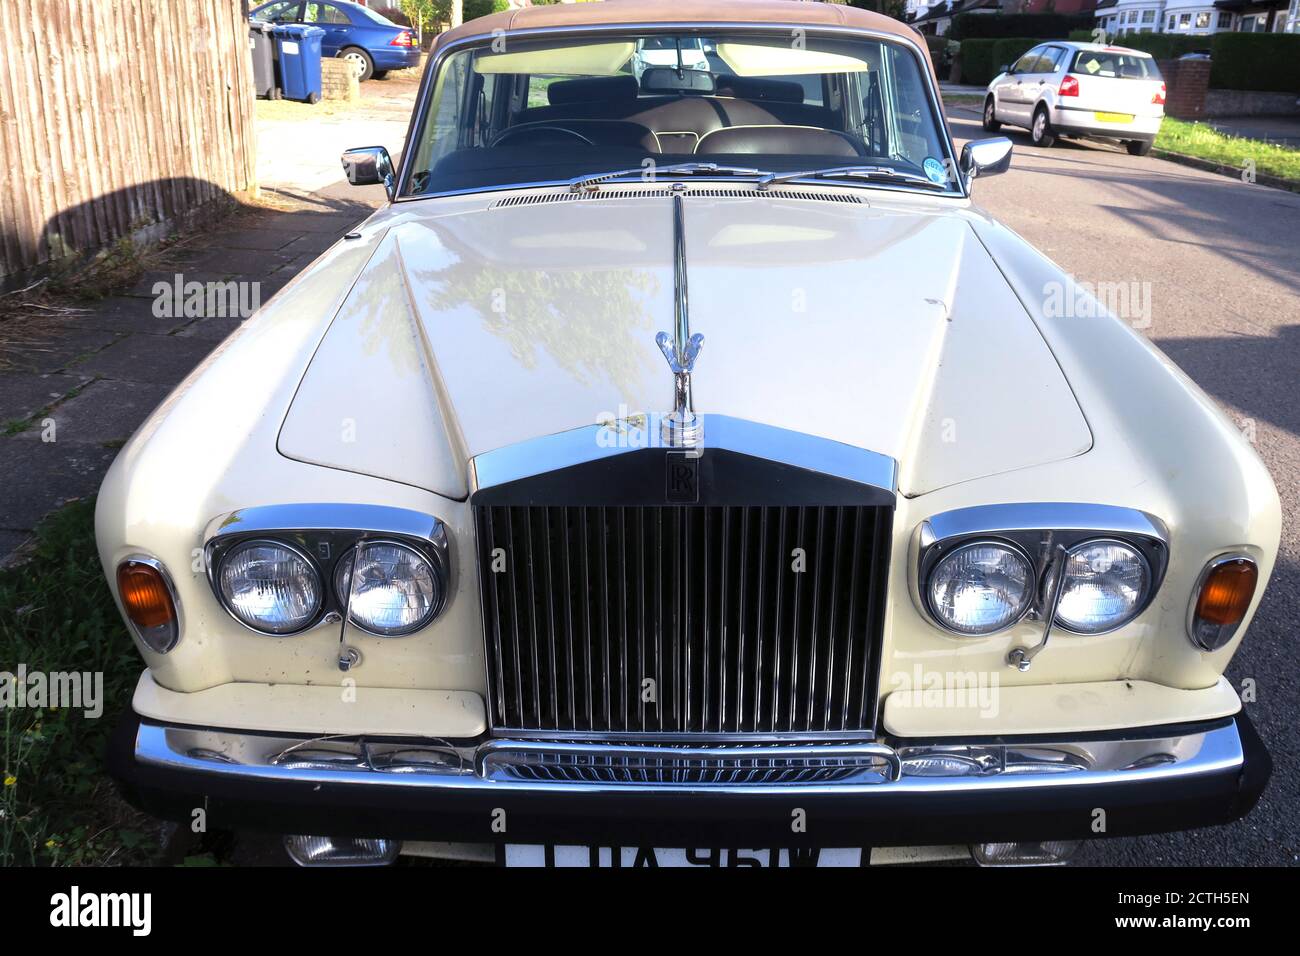 Vintage Rolls Royce saloon parked for repair Stock Photo